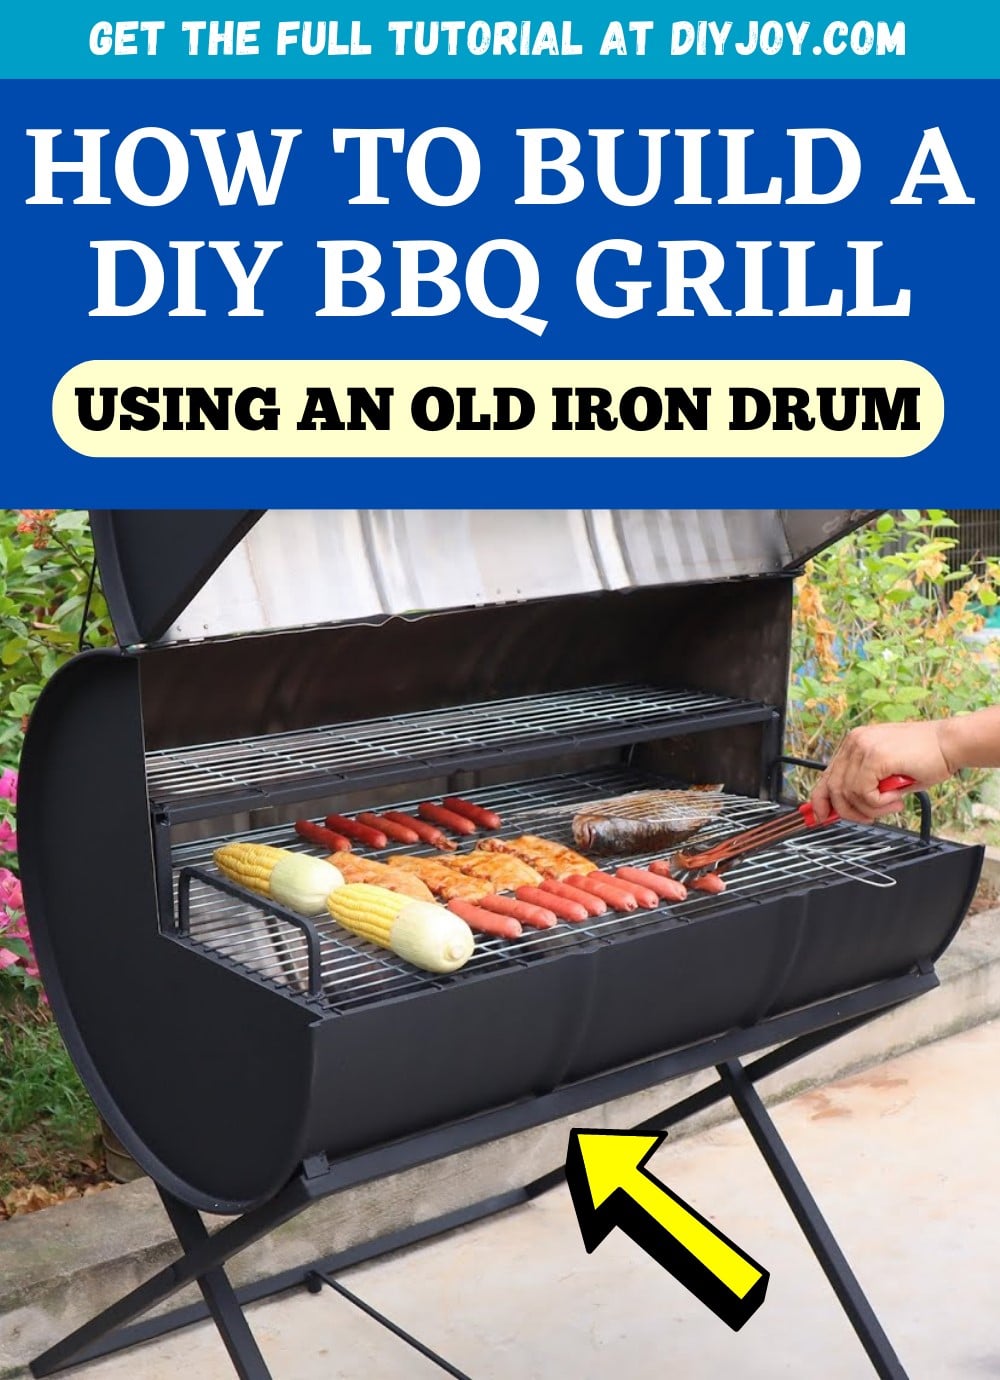 How to Build a DIY BBQ Grill w/ an Old Iron Drum